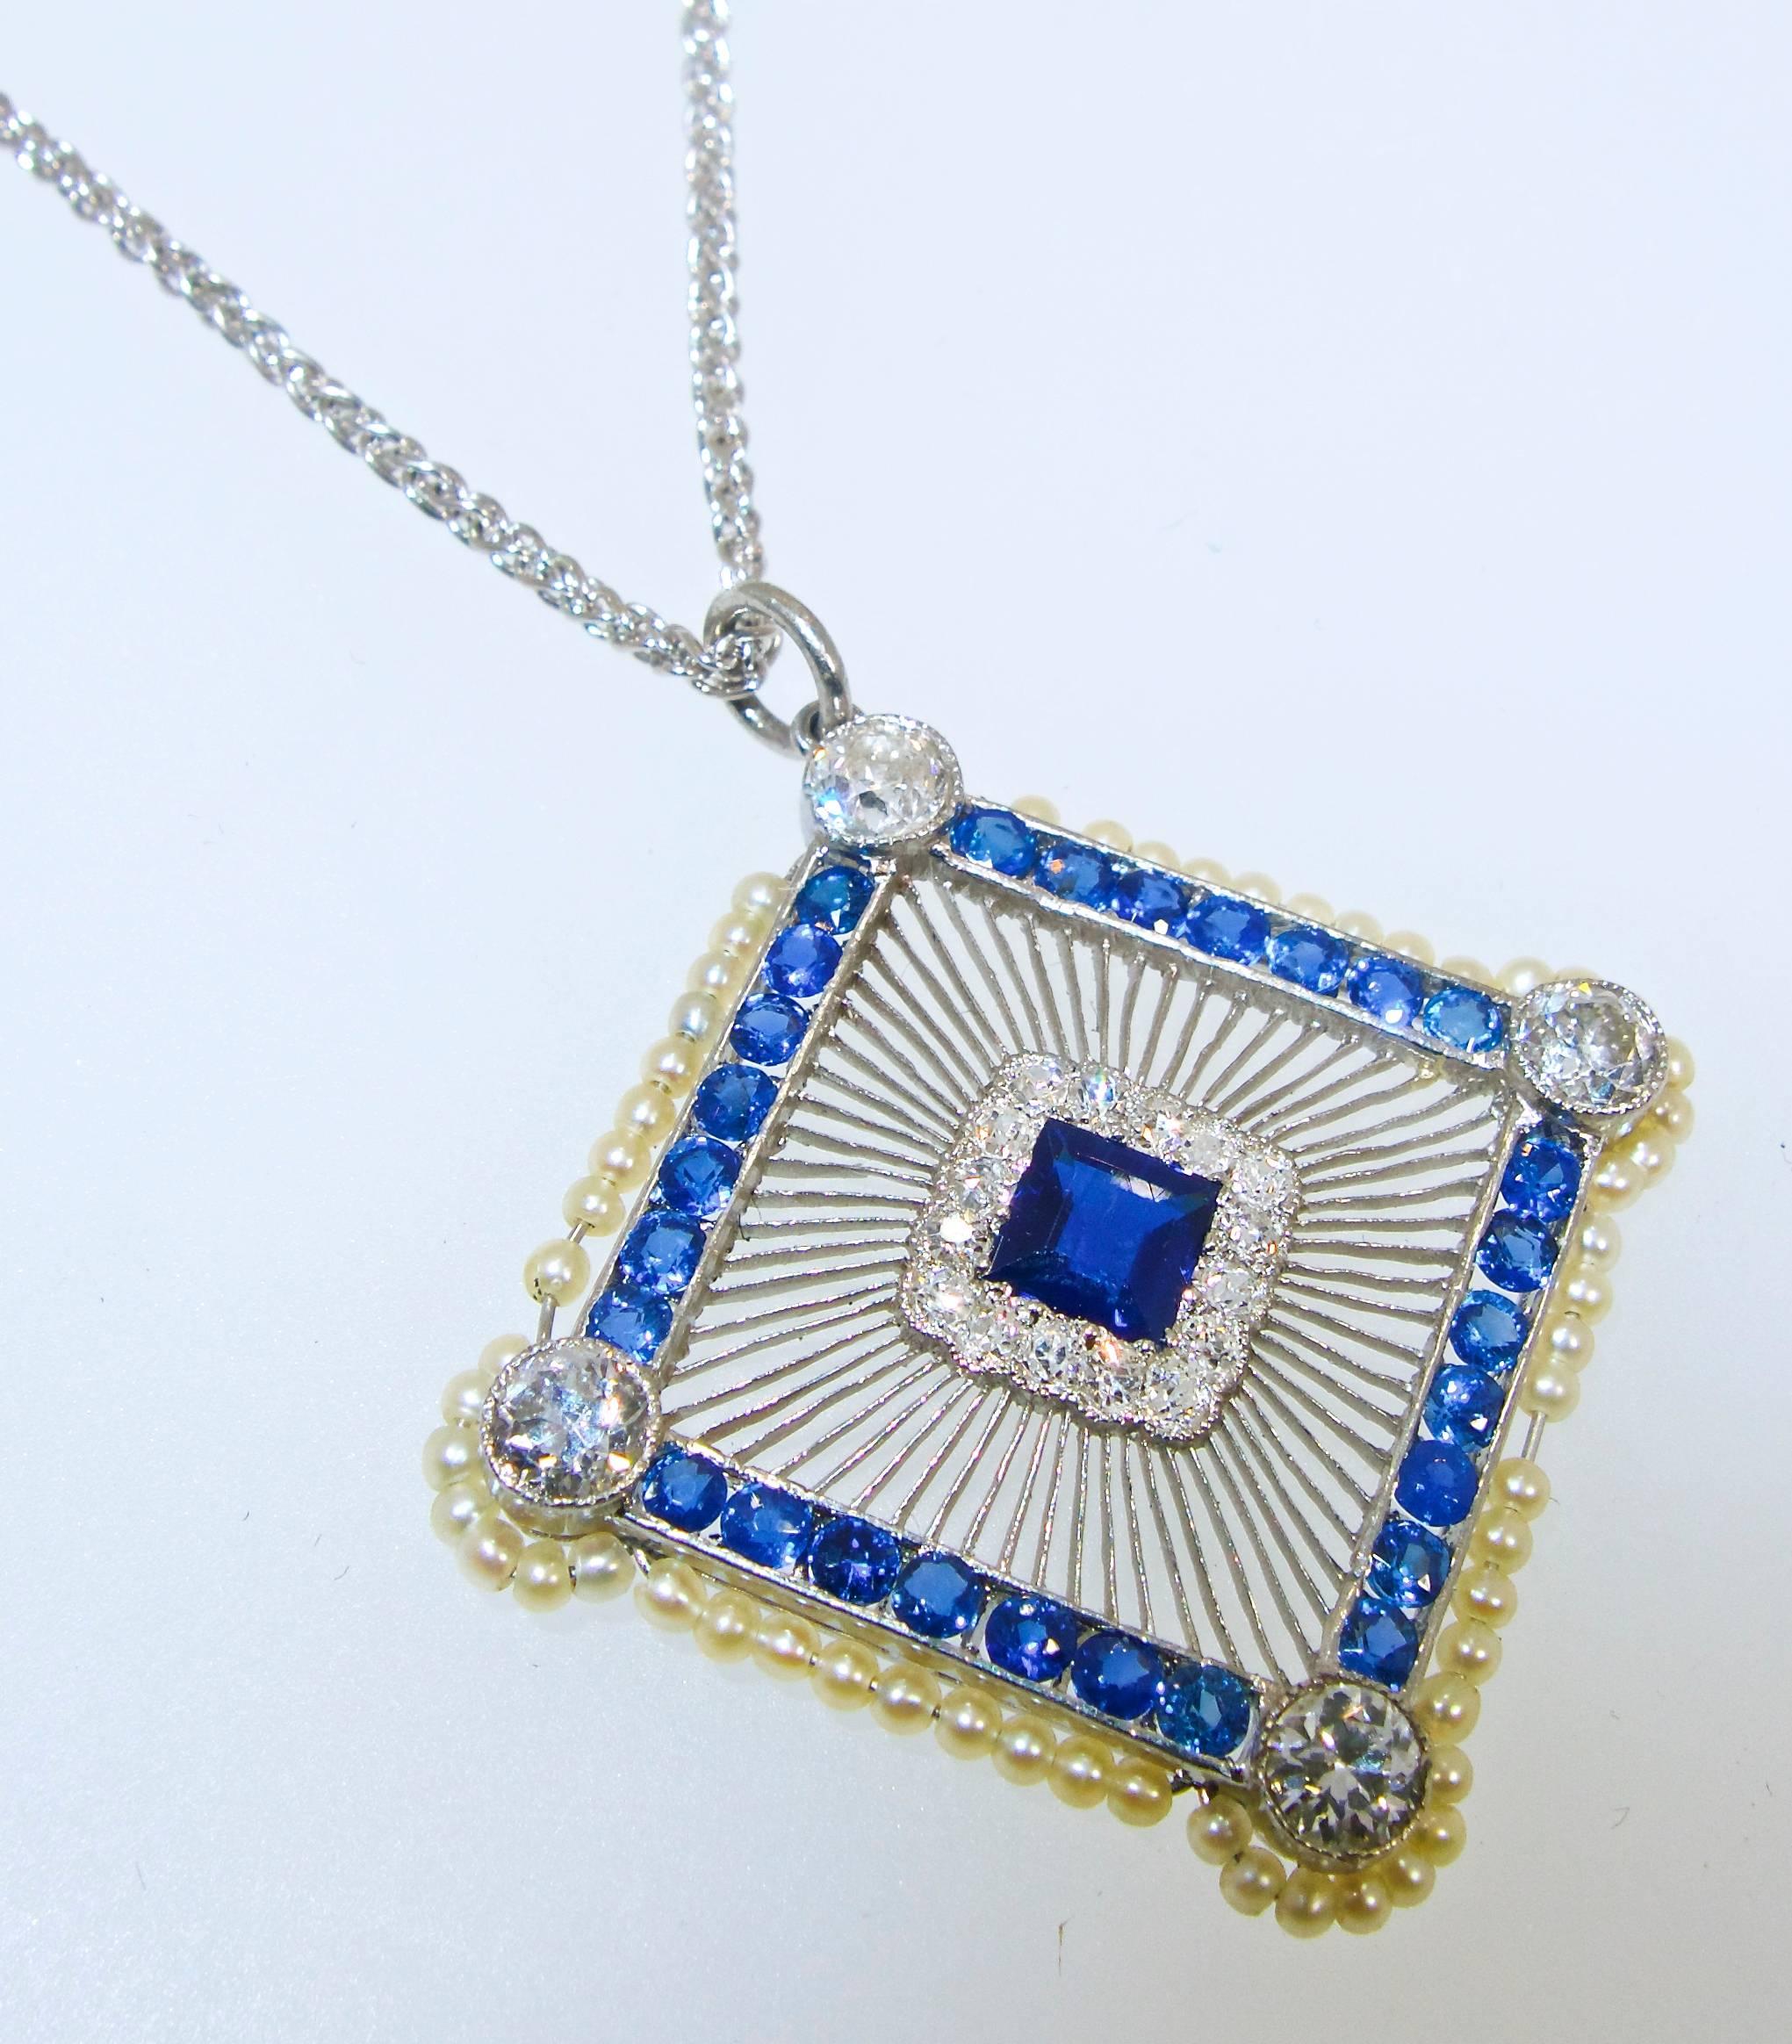 Circa 1915, Edwardian platinum pendant possessing just over .70 cts of small diamonds and 29 fine blue natural sapphires weighing totally just over 2.0 cts.  The pendant, which is bordered with natural small seed pearls, is .75 inches wide and 1.0